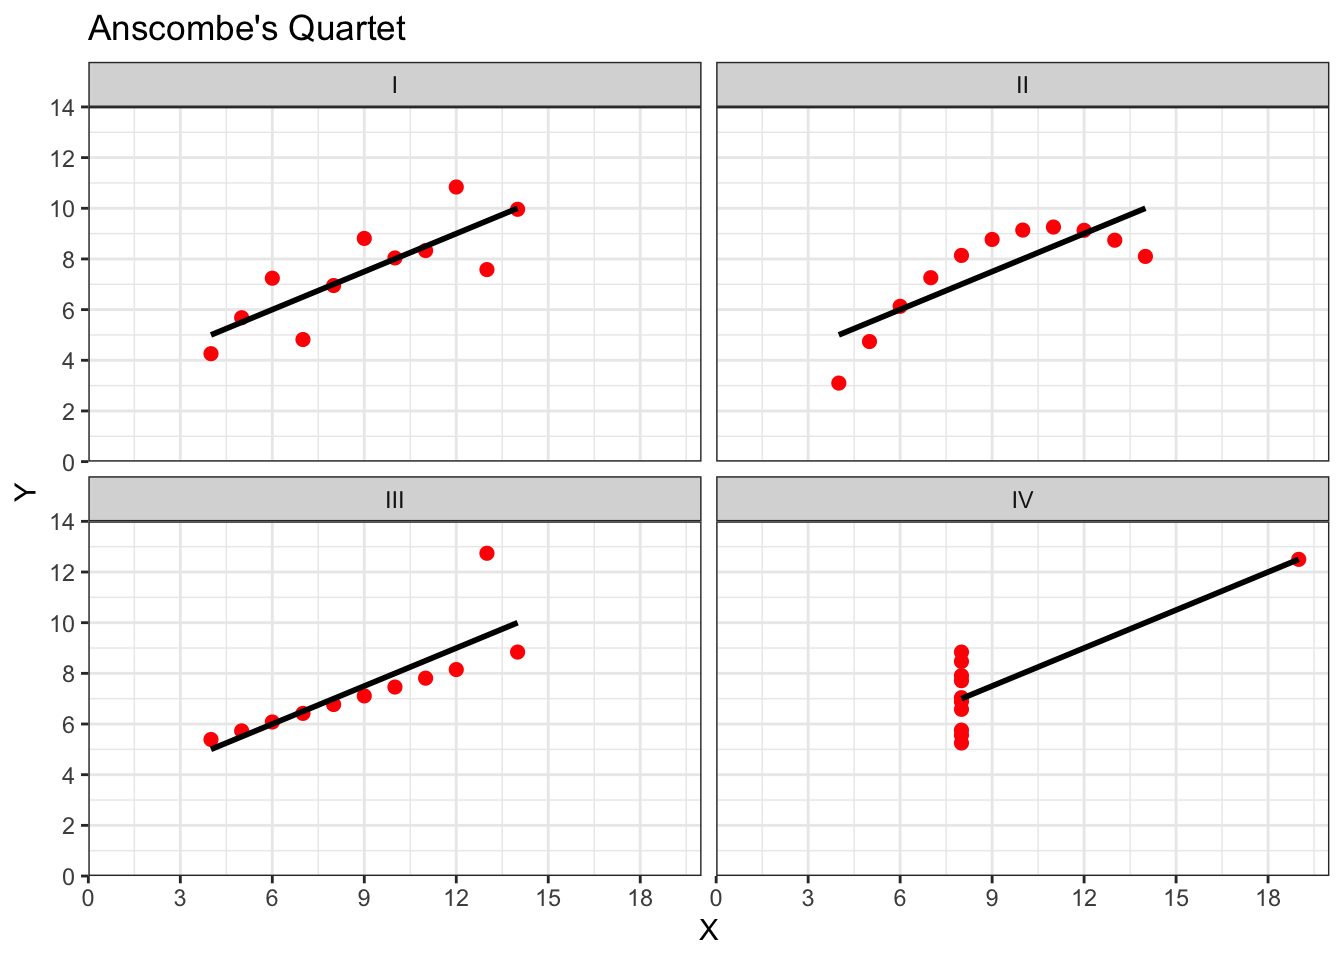 Though all datasets have a correlation of r = .82, when plotted the four datasets look very different. Grp I is a standard linear relationship where a pearson correlation would be suitable. Grp II would appear to be a non-linear relationship and a non-parametric analysis would be appropriate. Grp III again shows a linear relationship (approaching r = 1) where an outlier has lowered the correlation coefficient. Grp IV shows no relationship between the two variables (X, Y) but an oultier has inflated the correlation higher.